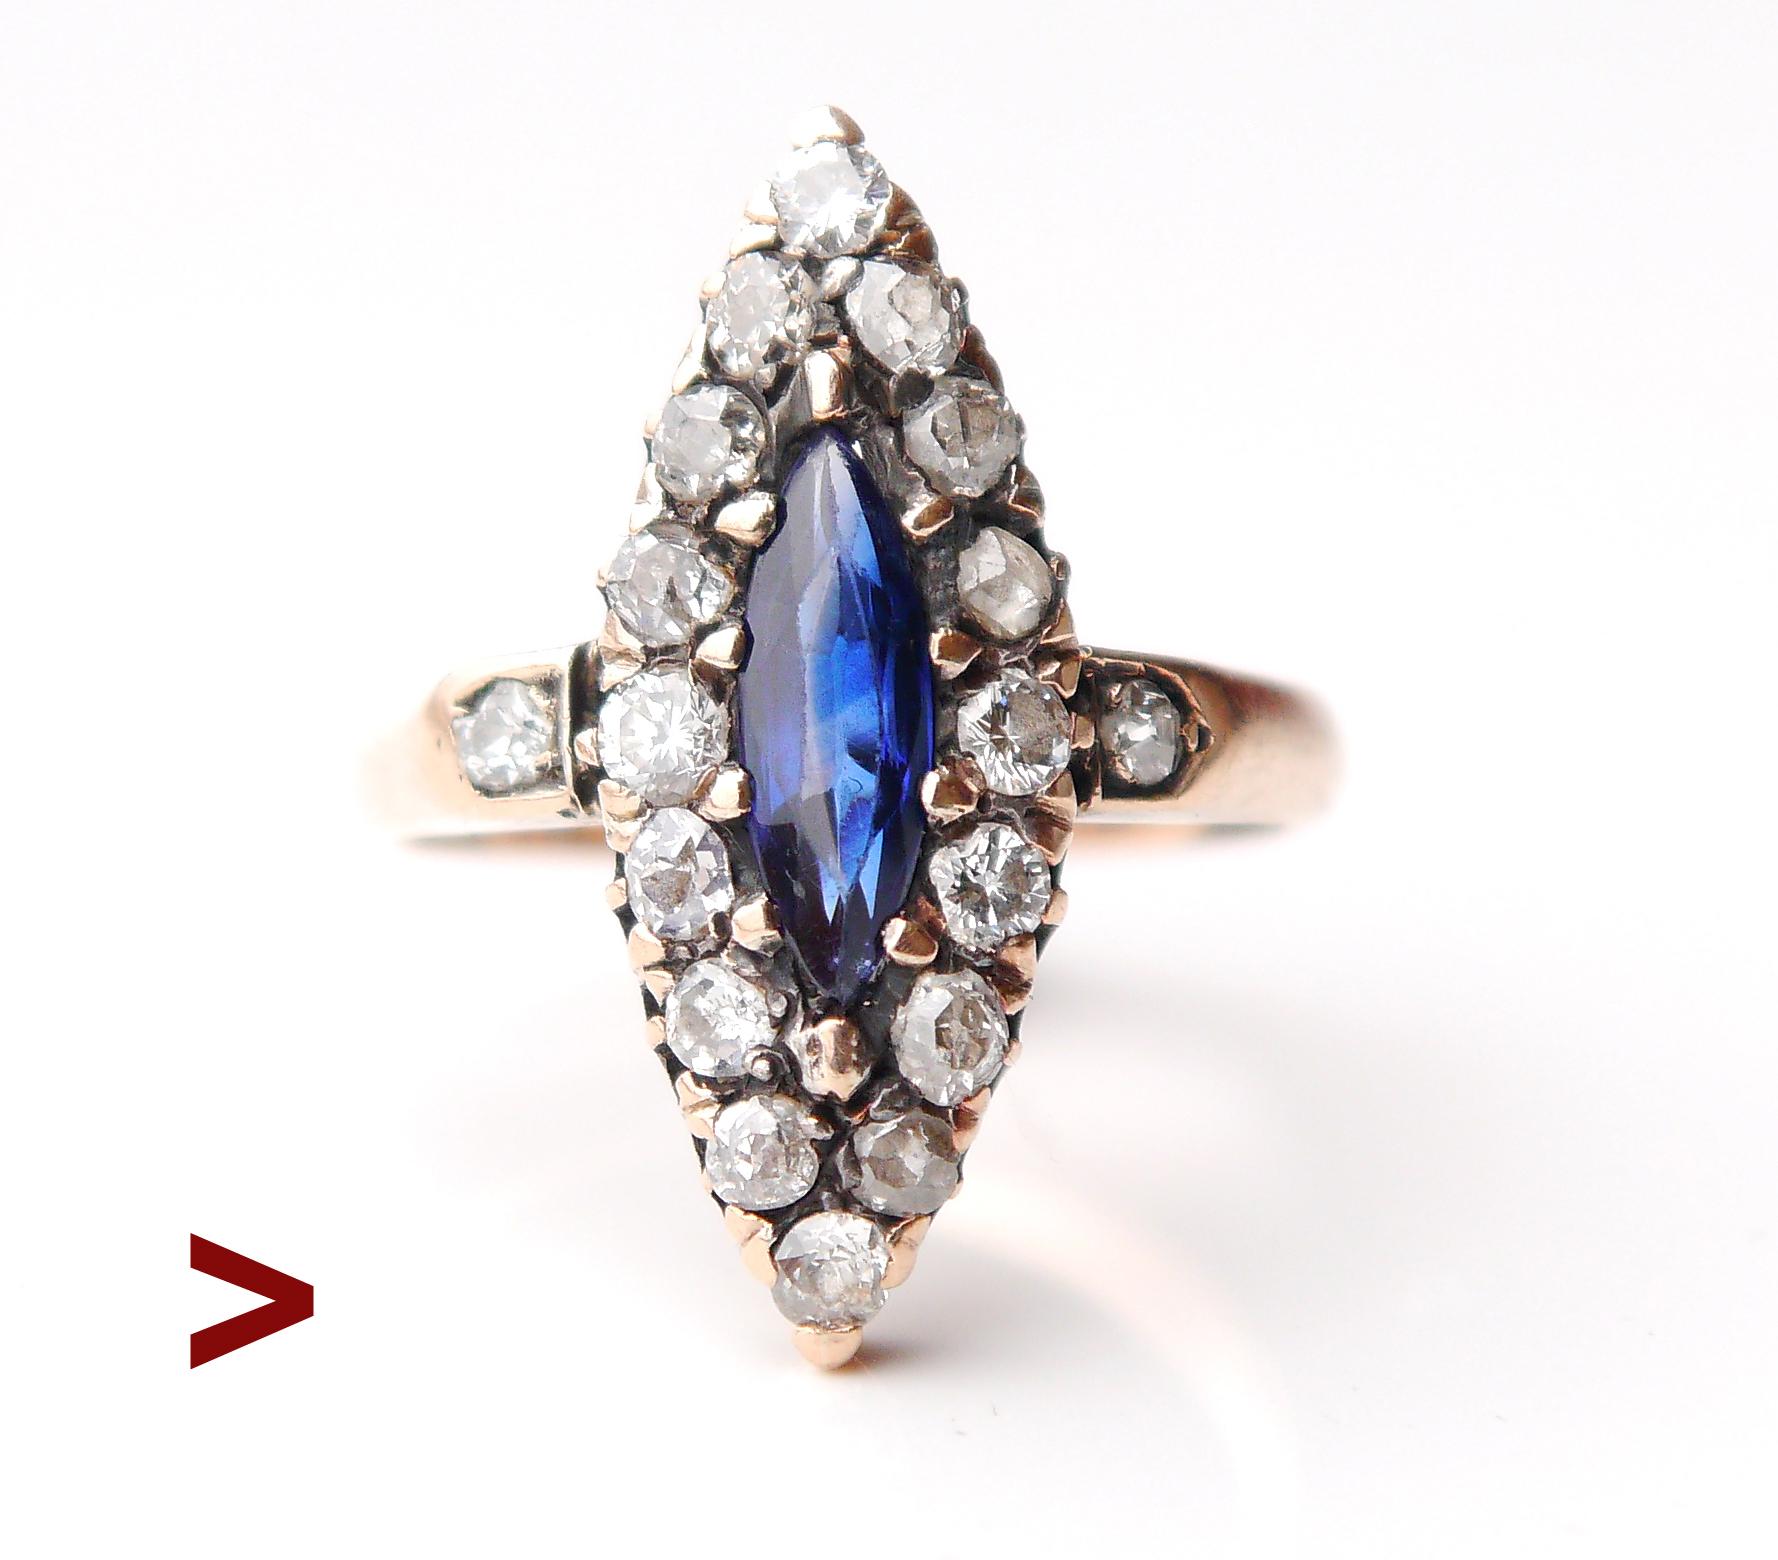 This old ring has a navette or boat-shaped crown with a Silver top on solid 14K Rose Gold set with marquise cut natural Blue Sapphire surrounded with 16 old diamond cut Diamonds on the crown and flanked with 2 more diamonds on the flanks.

XIX -